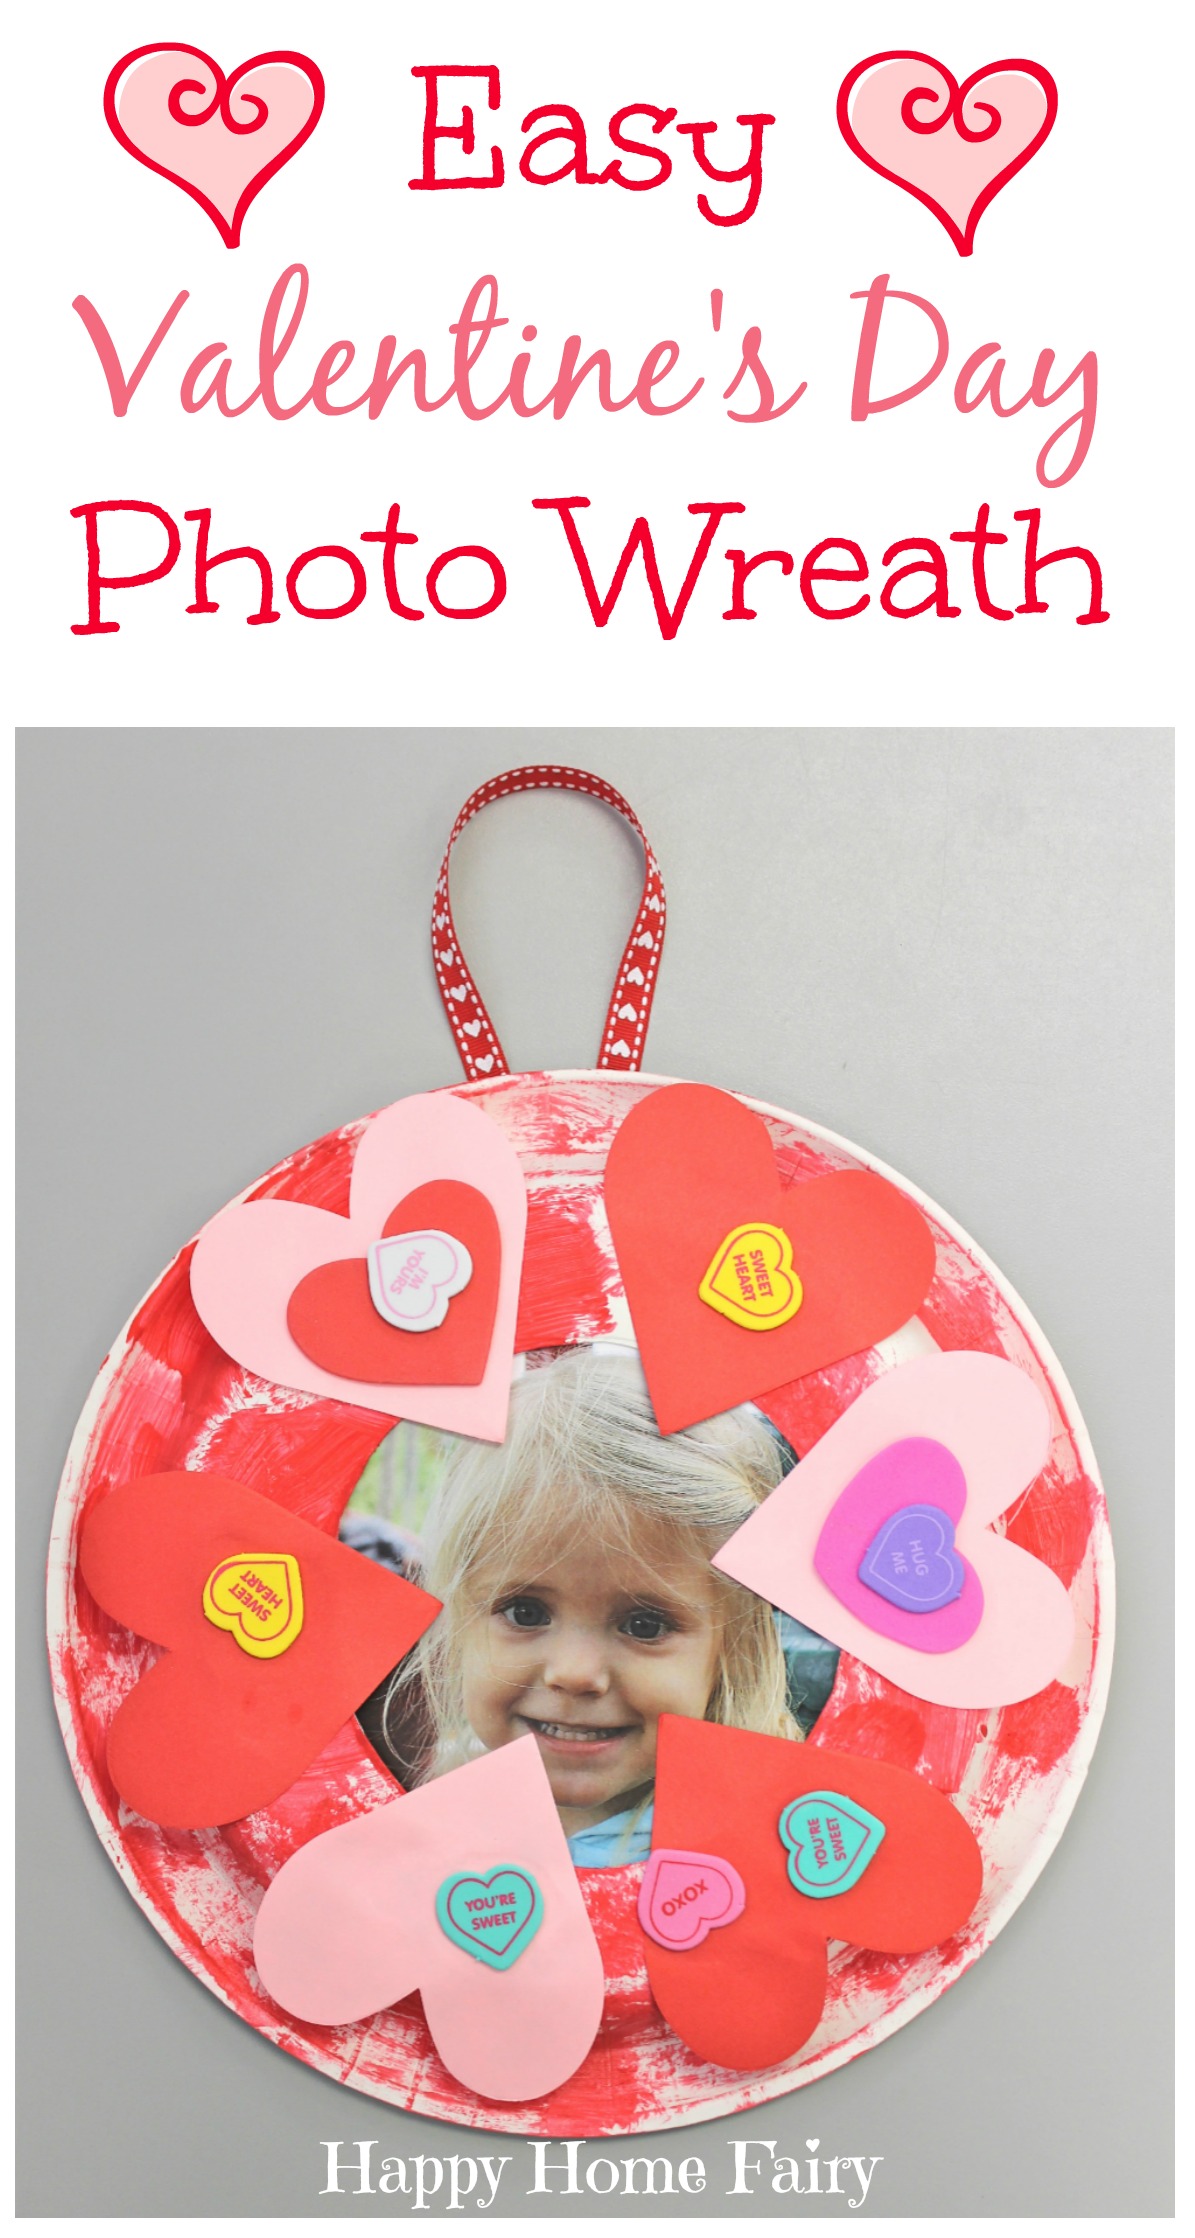 20 Ideas for Valentines Day Crafts Preschoolers Best Recipes Ideas